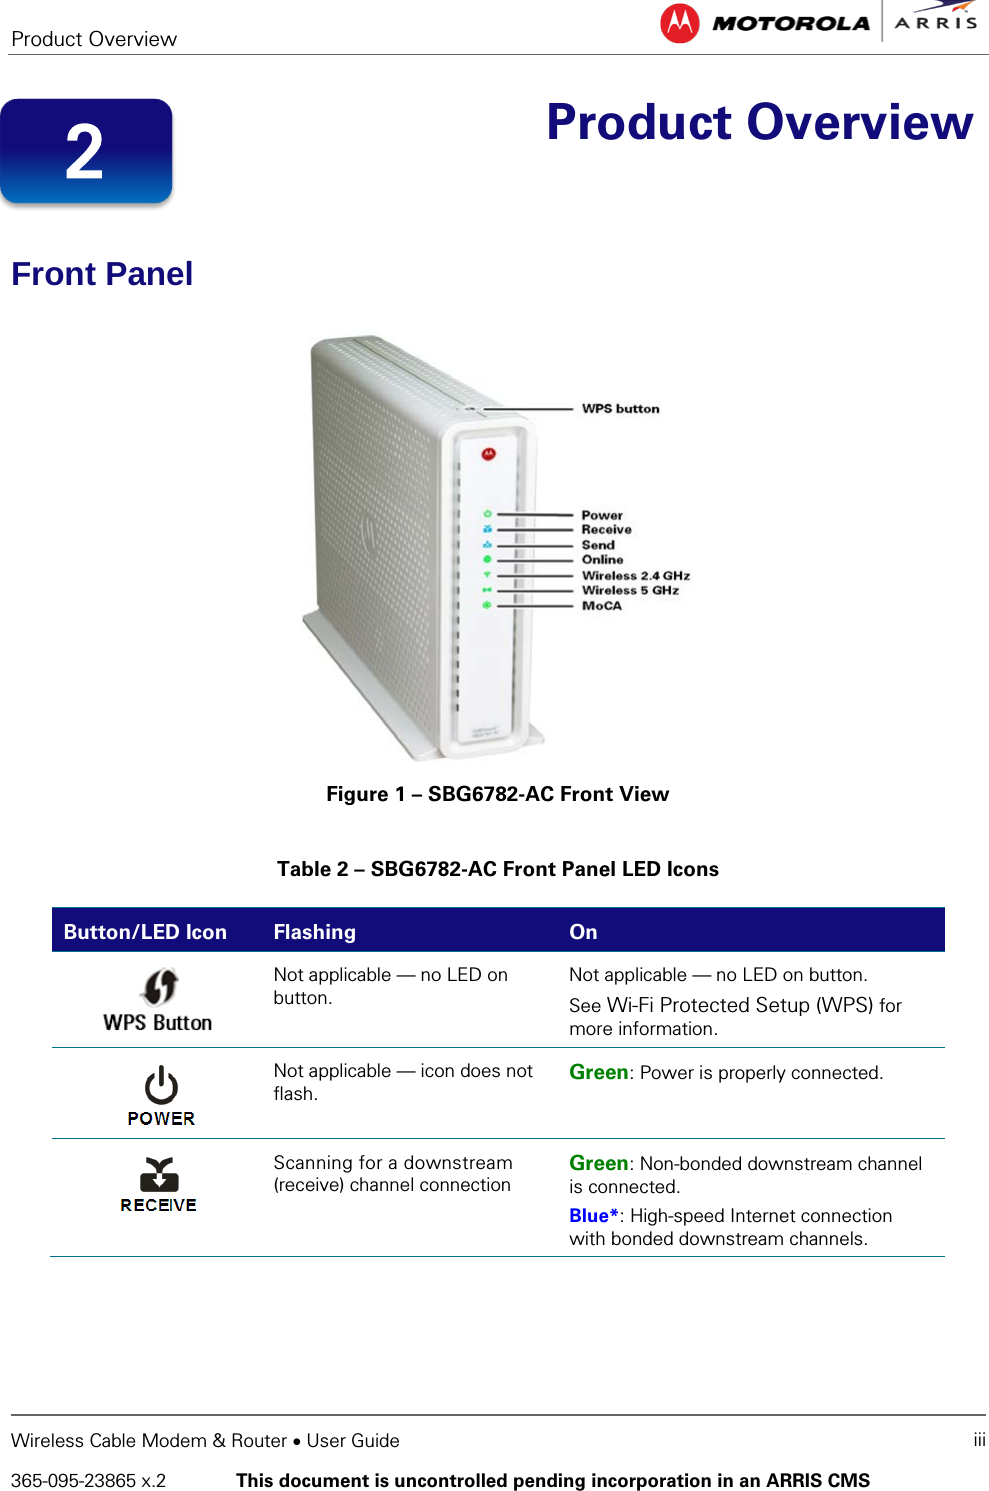 Product Overview   Wireless Cable Modem &amp; Router • User Guide iii 365-095-23865 x.2   This document is uncontrolled pending incorporation in an ARRIS CMS   Product Overview Front Panel  Figure 1 – SBG6782-AC Front View  Table 2 – SBG6782-AC Front Panel LED Icons Button/LED Icon Flashing On  Not applicable — no LED on button. Not applicable — no LED on button. See Wi-Fi Protected Setup (WPS) for more information.  Not applicable — icon does not flash. Green: Power is properly connected.  Scanning for a downstream (receive) channel connection Green: Non-bonded downstream channel is connected. Blue*: High-speed Internet connection with bonded downstream channels. 2 